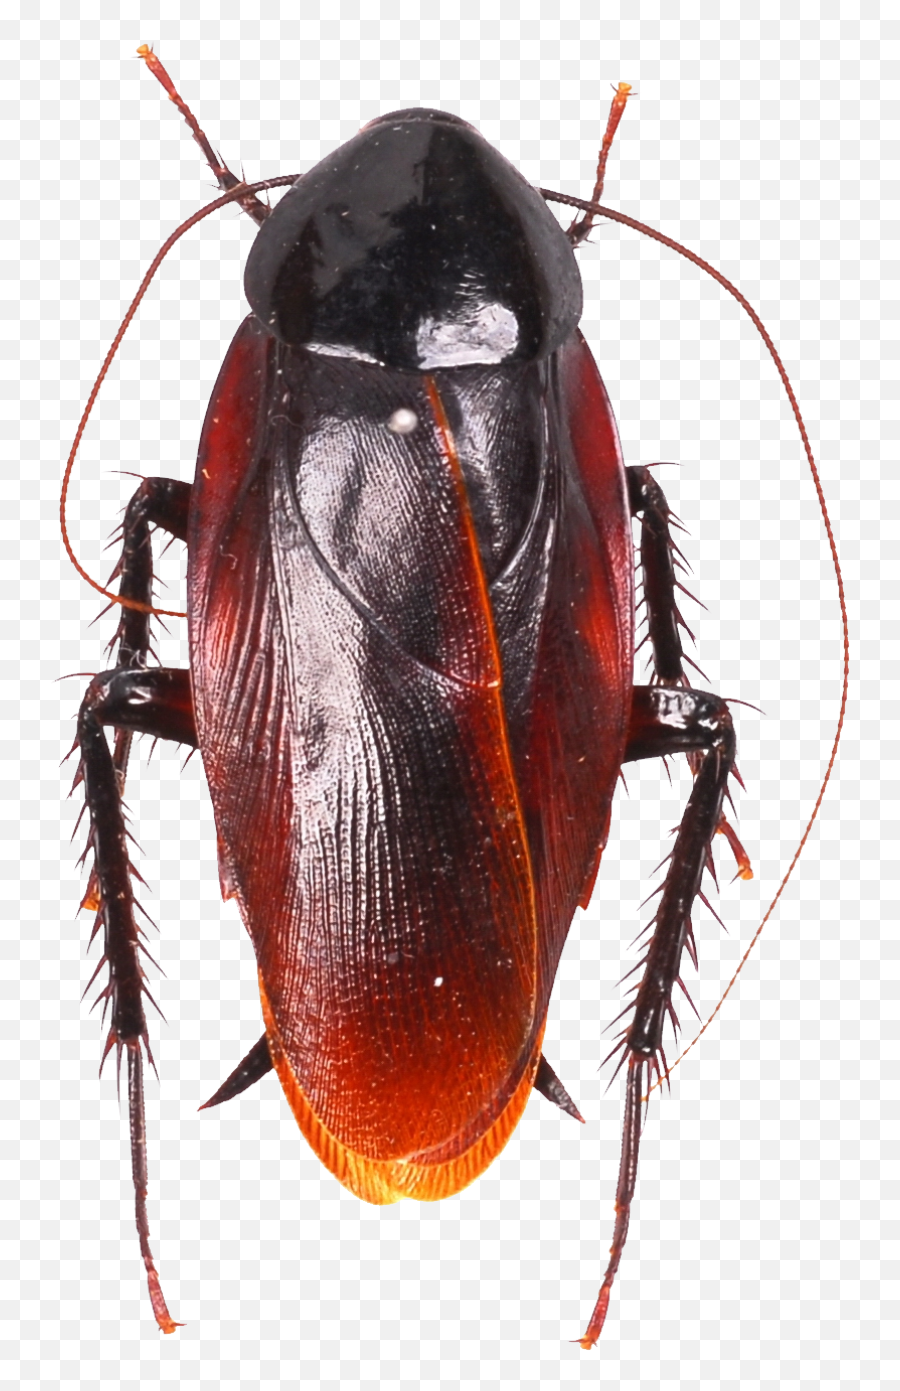 Roach Png Images Free Download - Cockroach Types,Cockroach Png